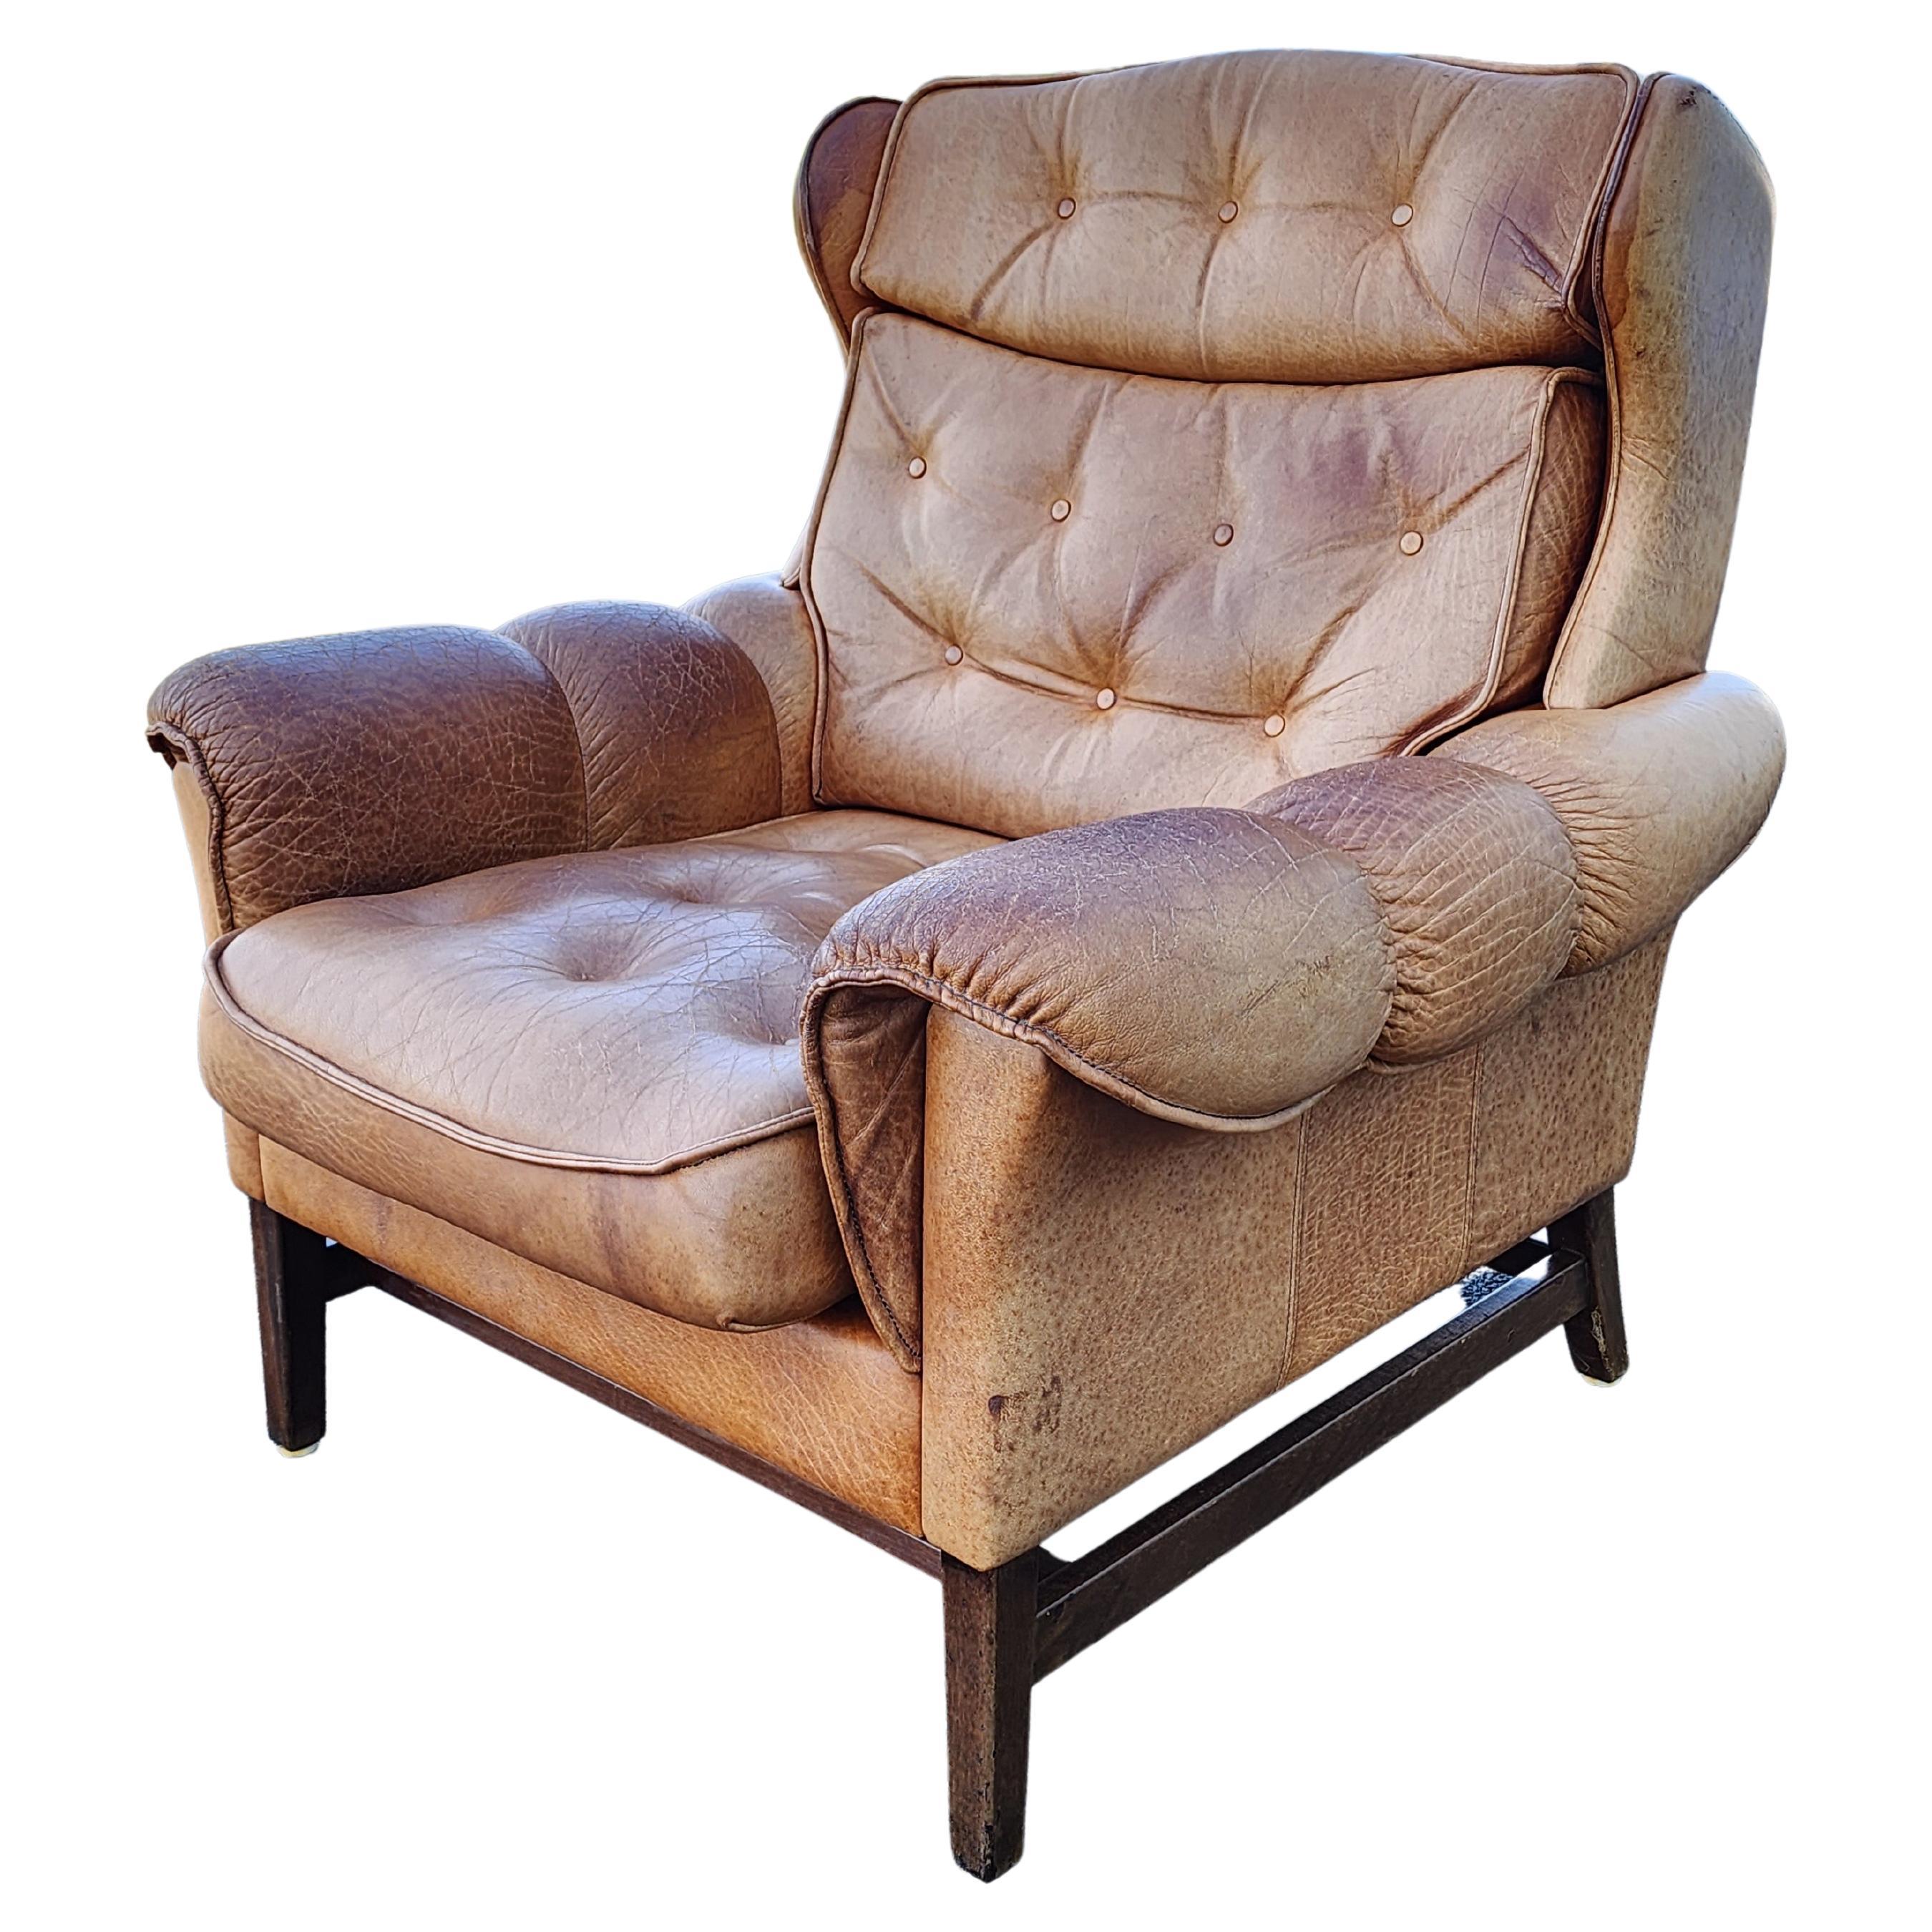 Handsome sculptural and comfortable. Those three words best tell the story of this danish leather chair from the nineteen seventies.  It is beautifully stuffed and has the surface of a warm, aged patina. This chair is turnkey and ready to go.
Please